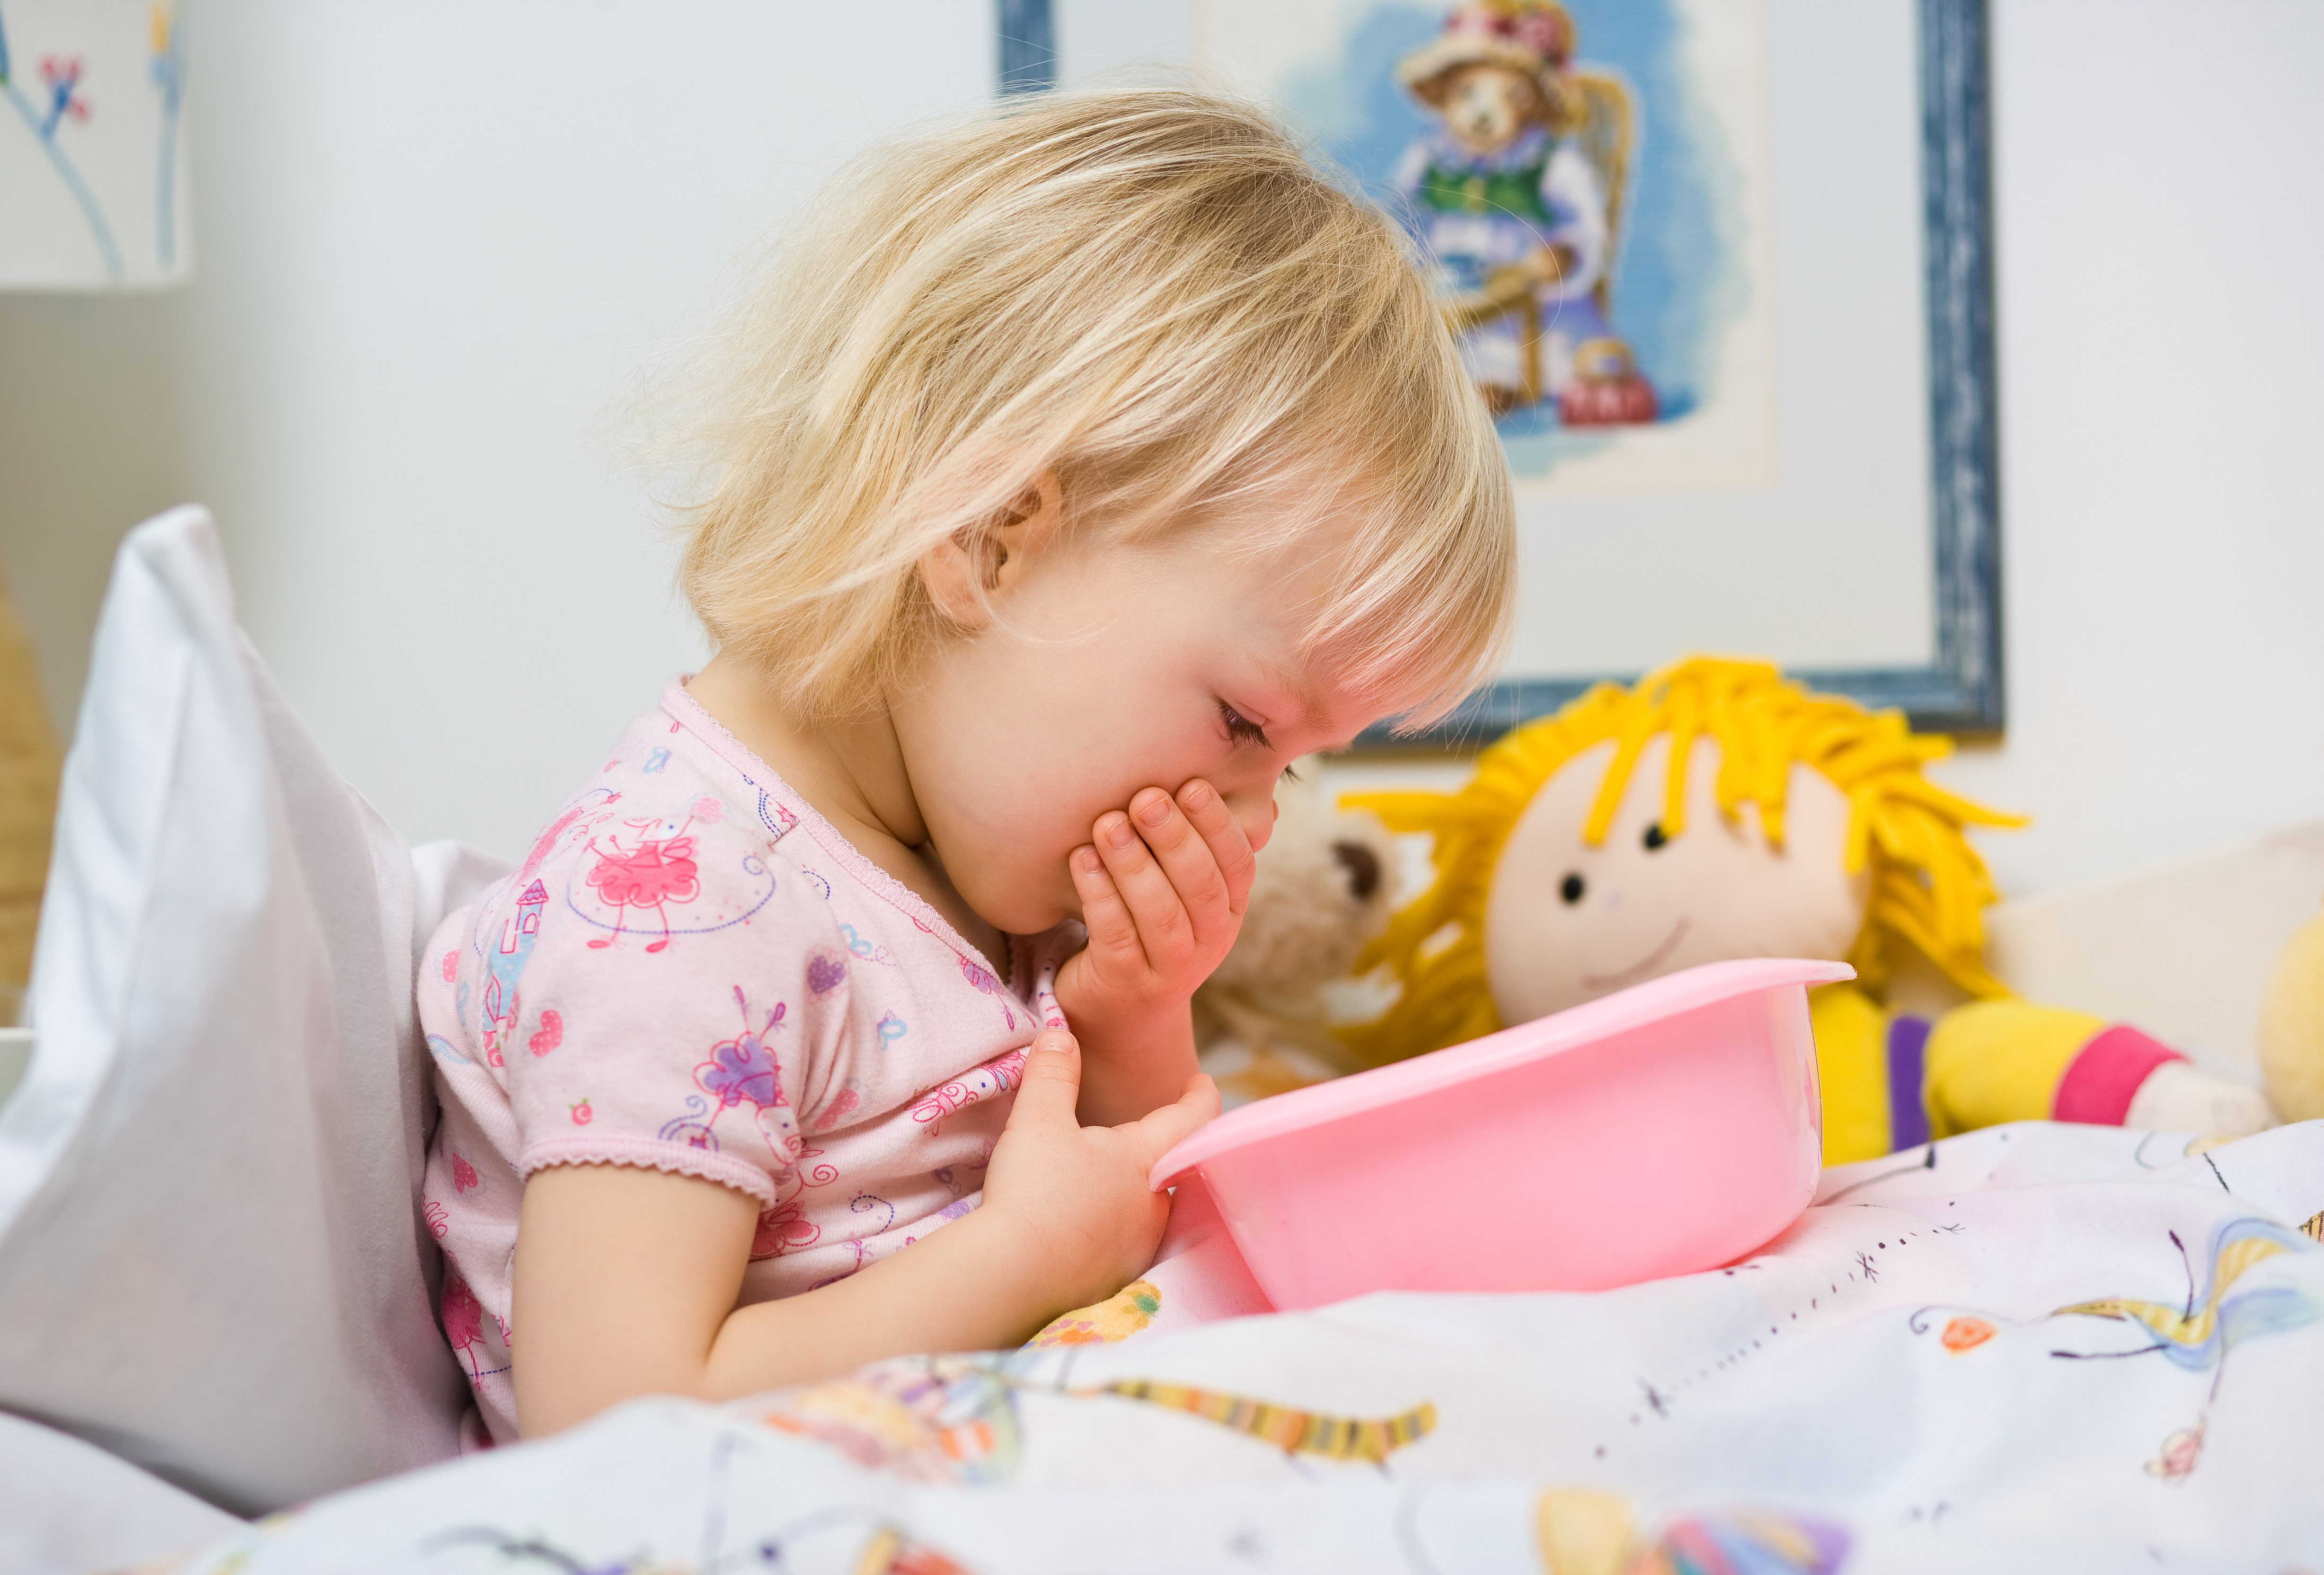 Your Child is Vomiting? It may be an Abdominal Migraine